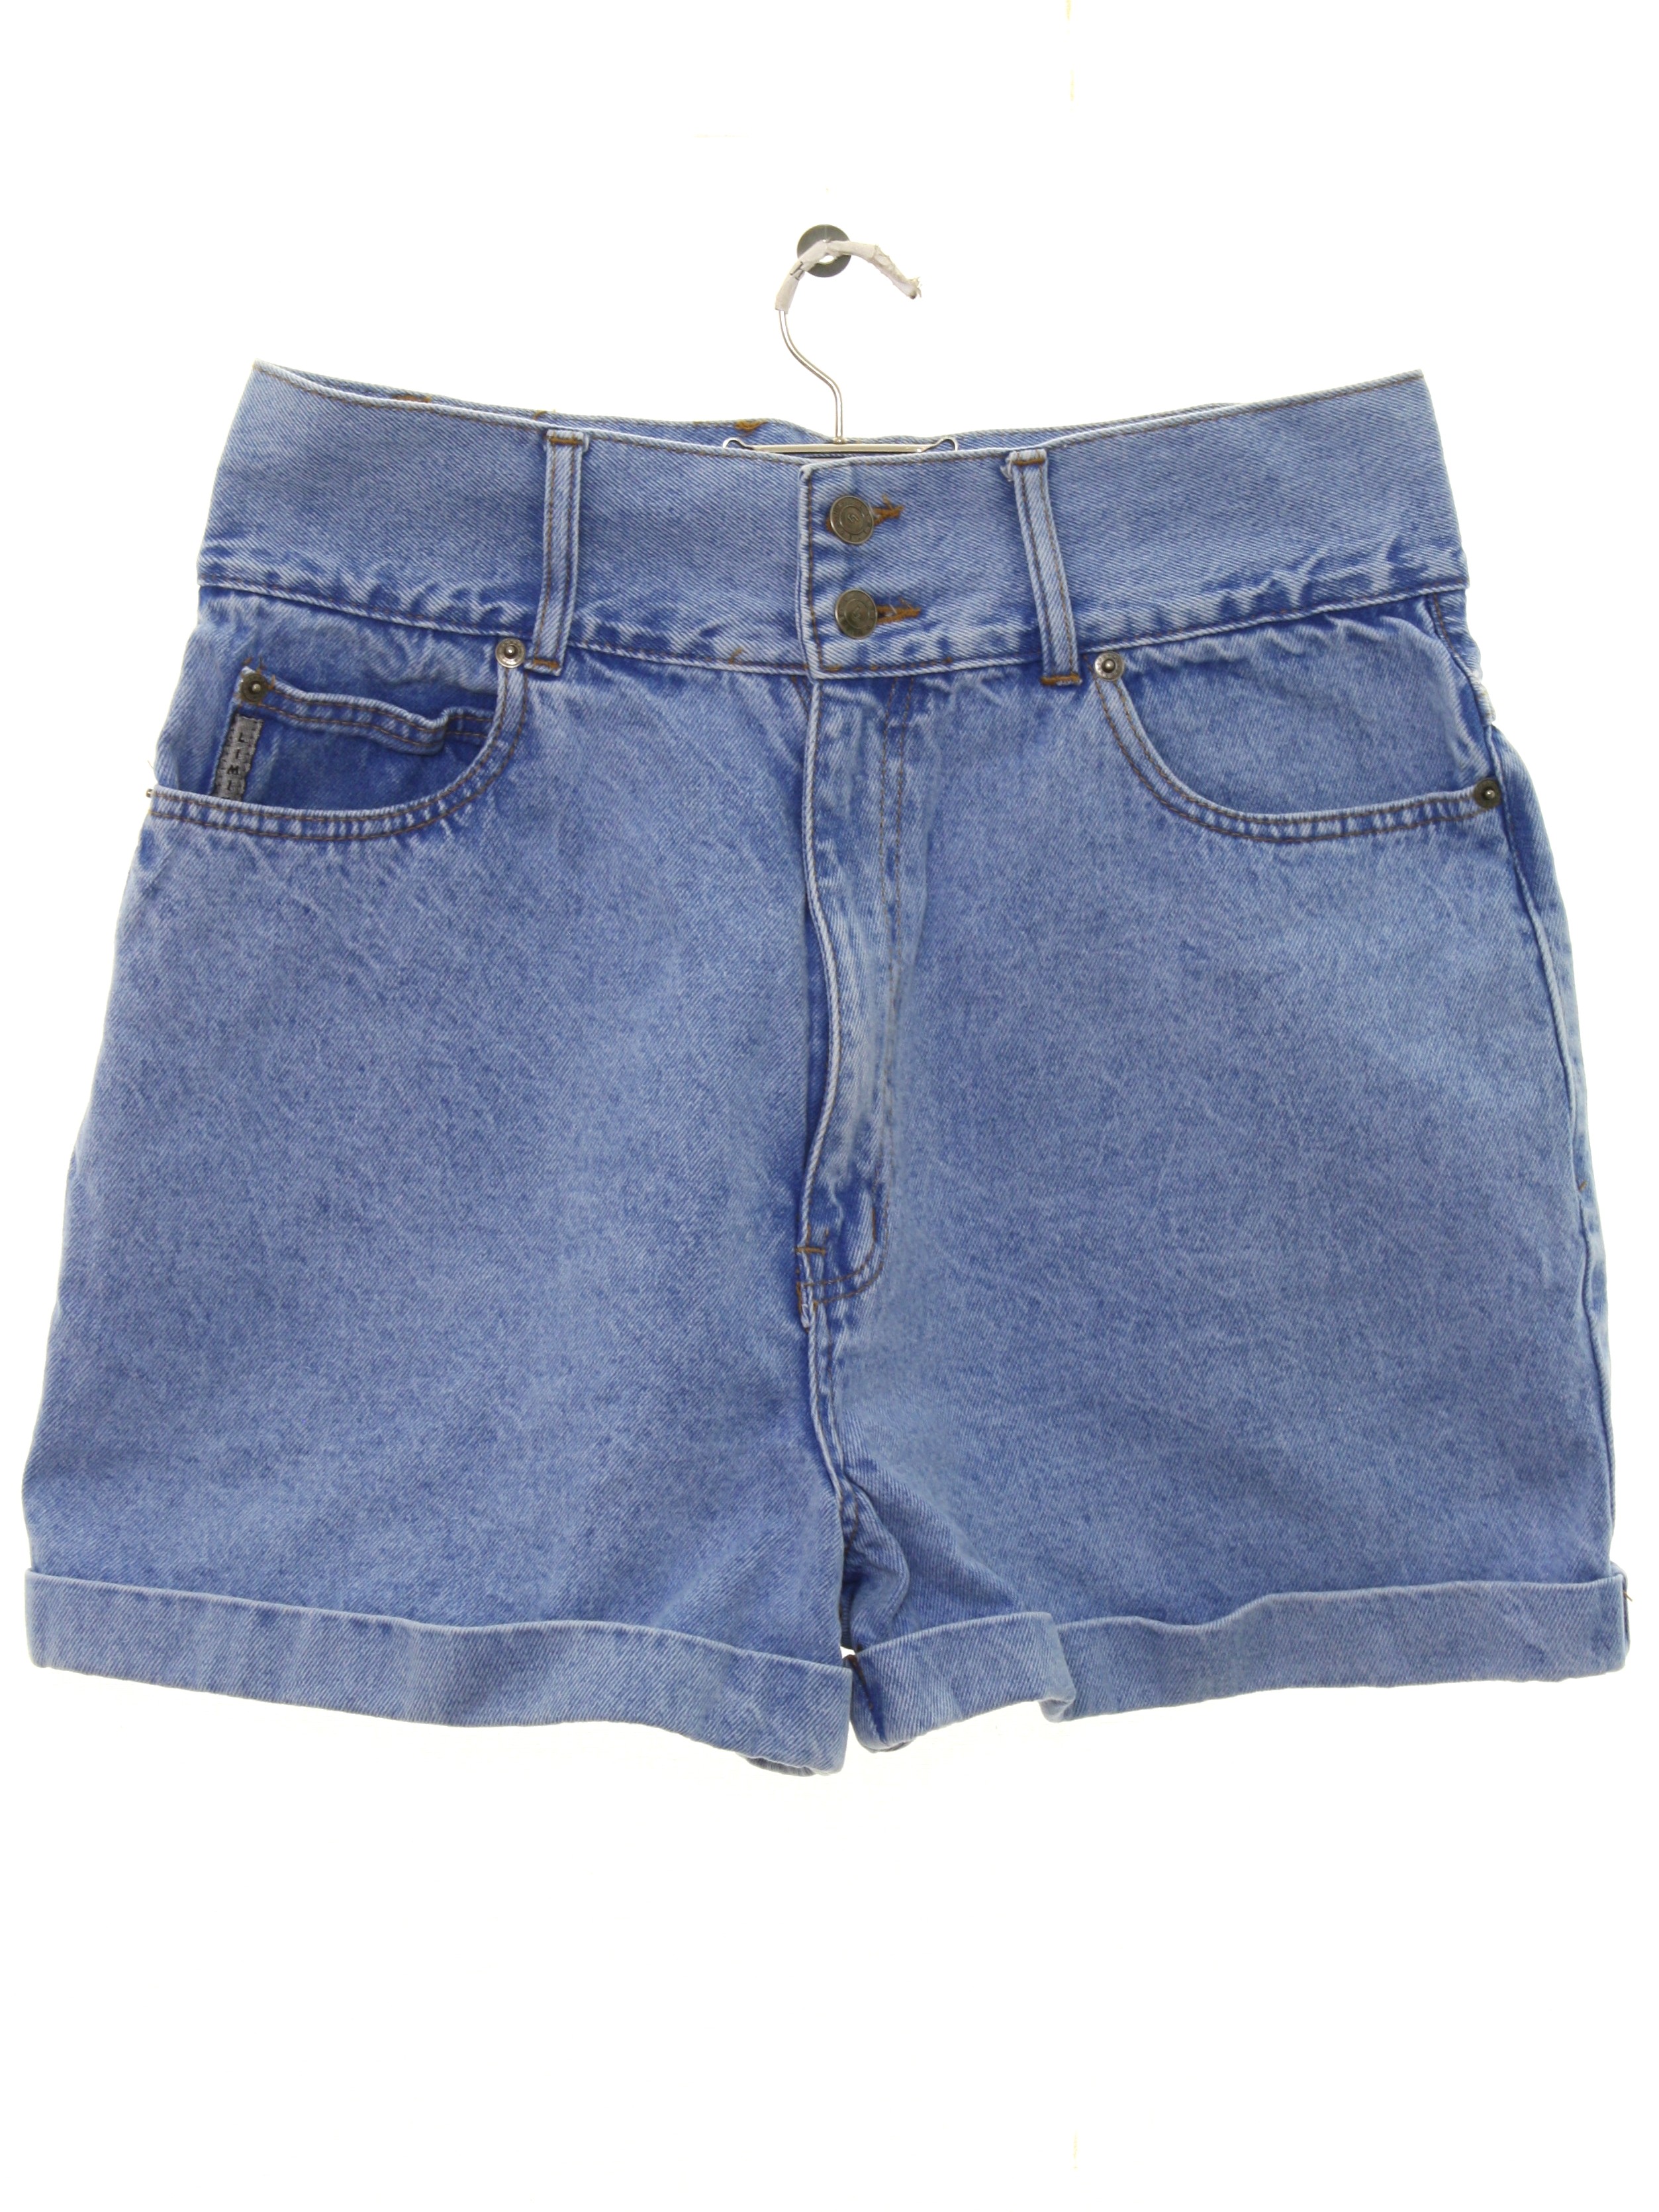 80's Limited Shorts: 80s -Limited- Womens blue background cotton denim ...